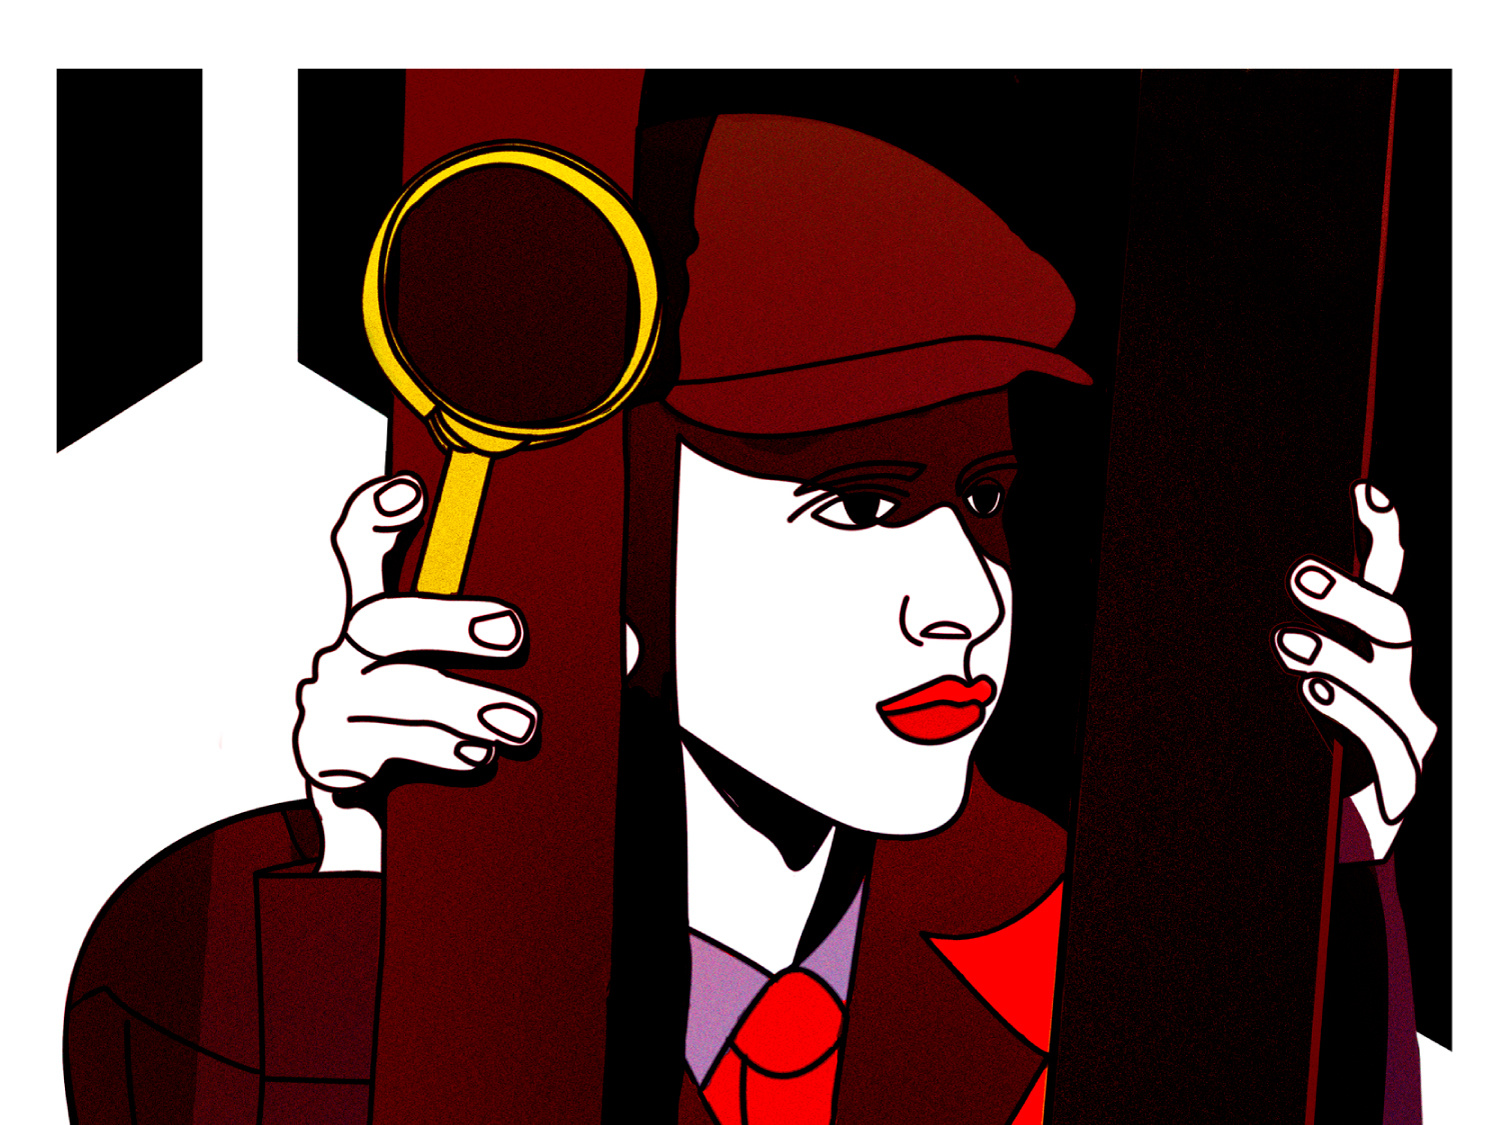 Cosmos Fantástico | Sherlock Holmes by Quint Visual on Dribbble